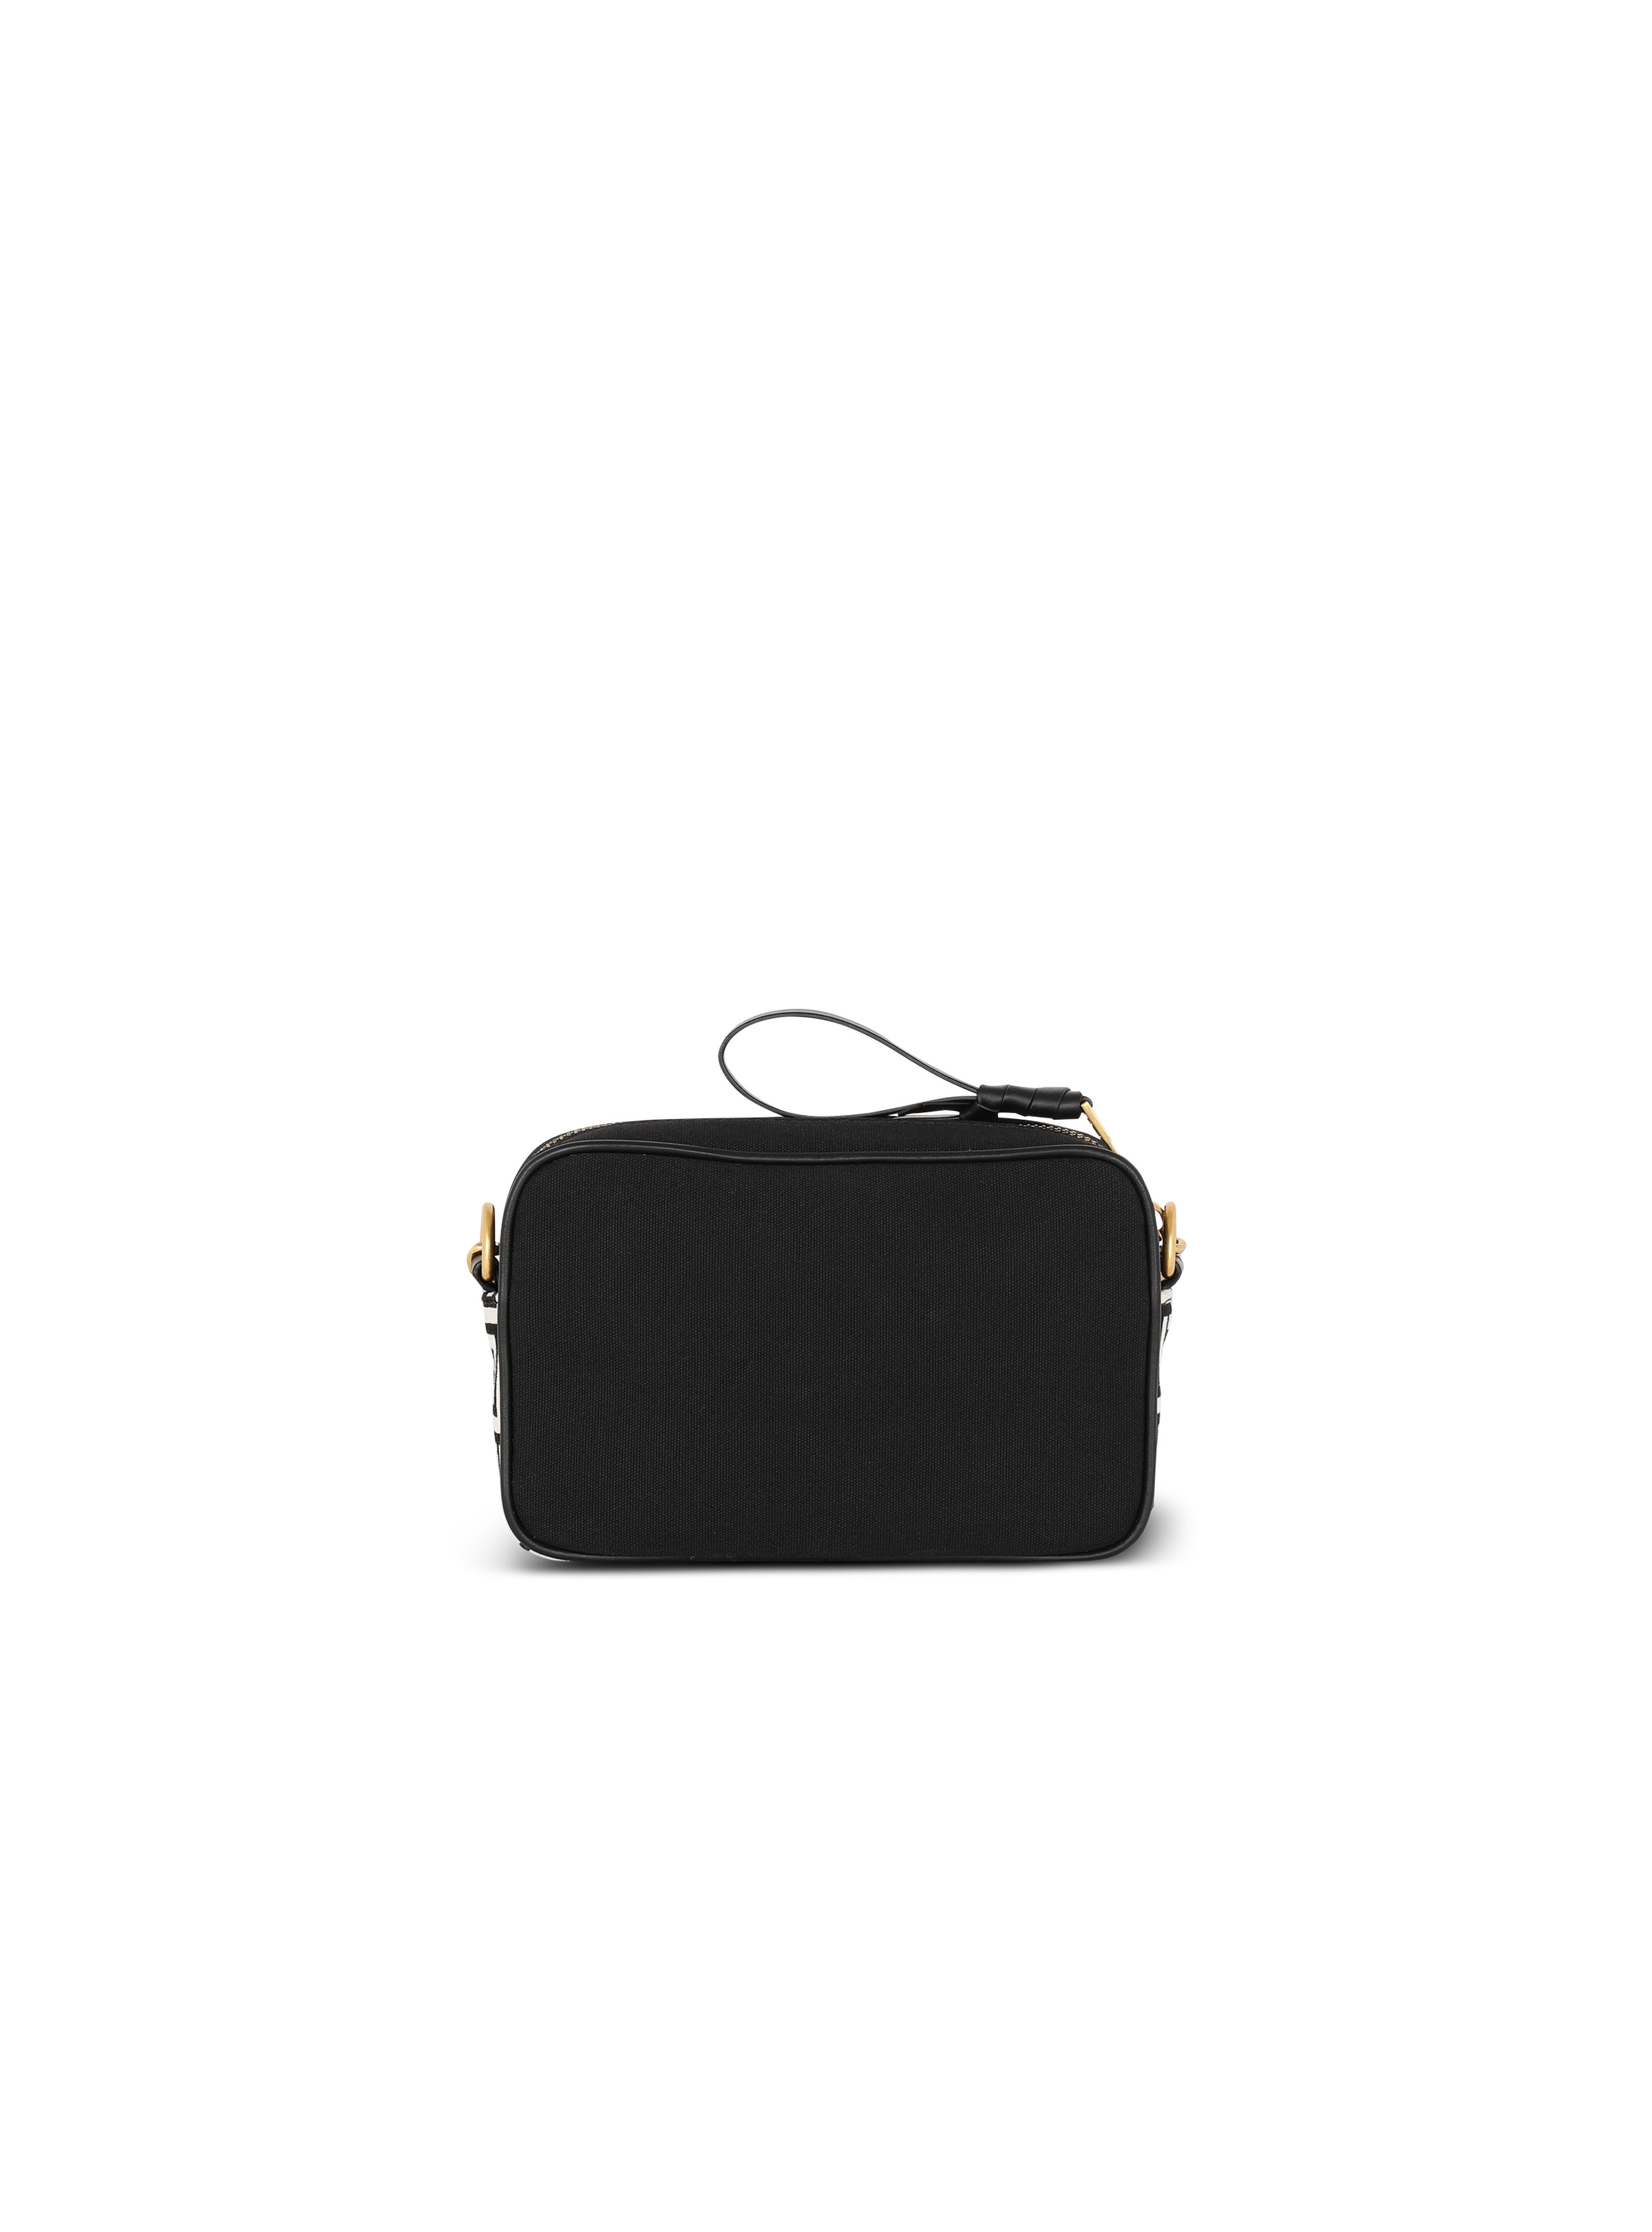 B-Army canvas and leather clutch - 4